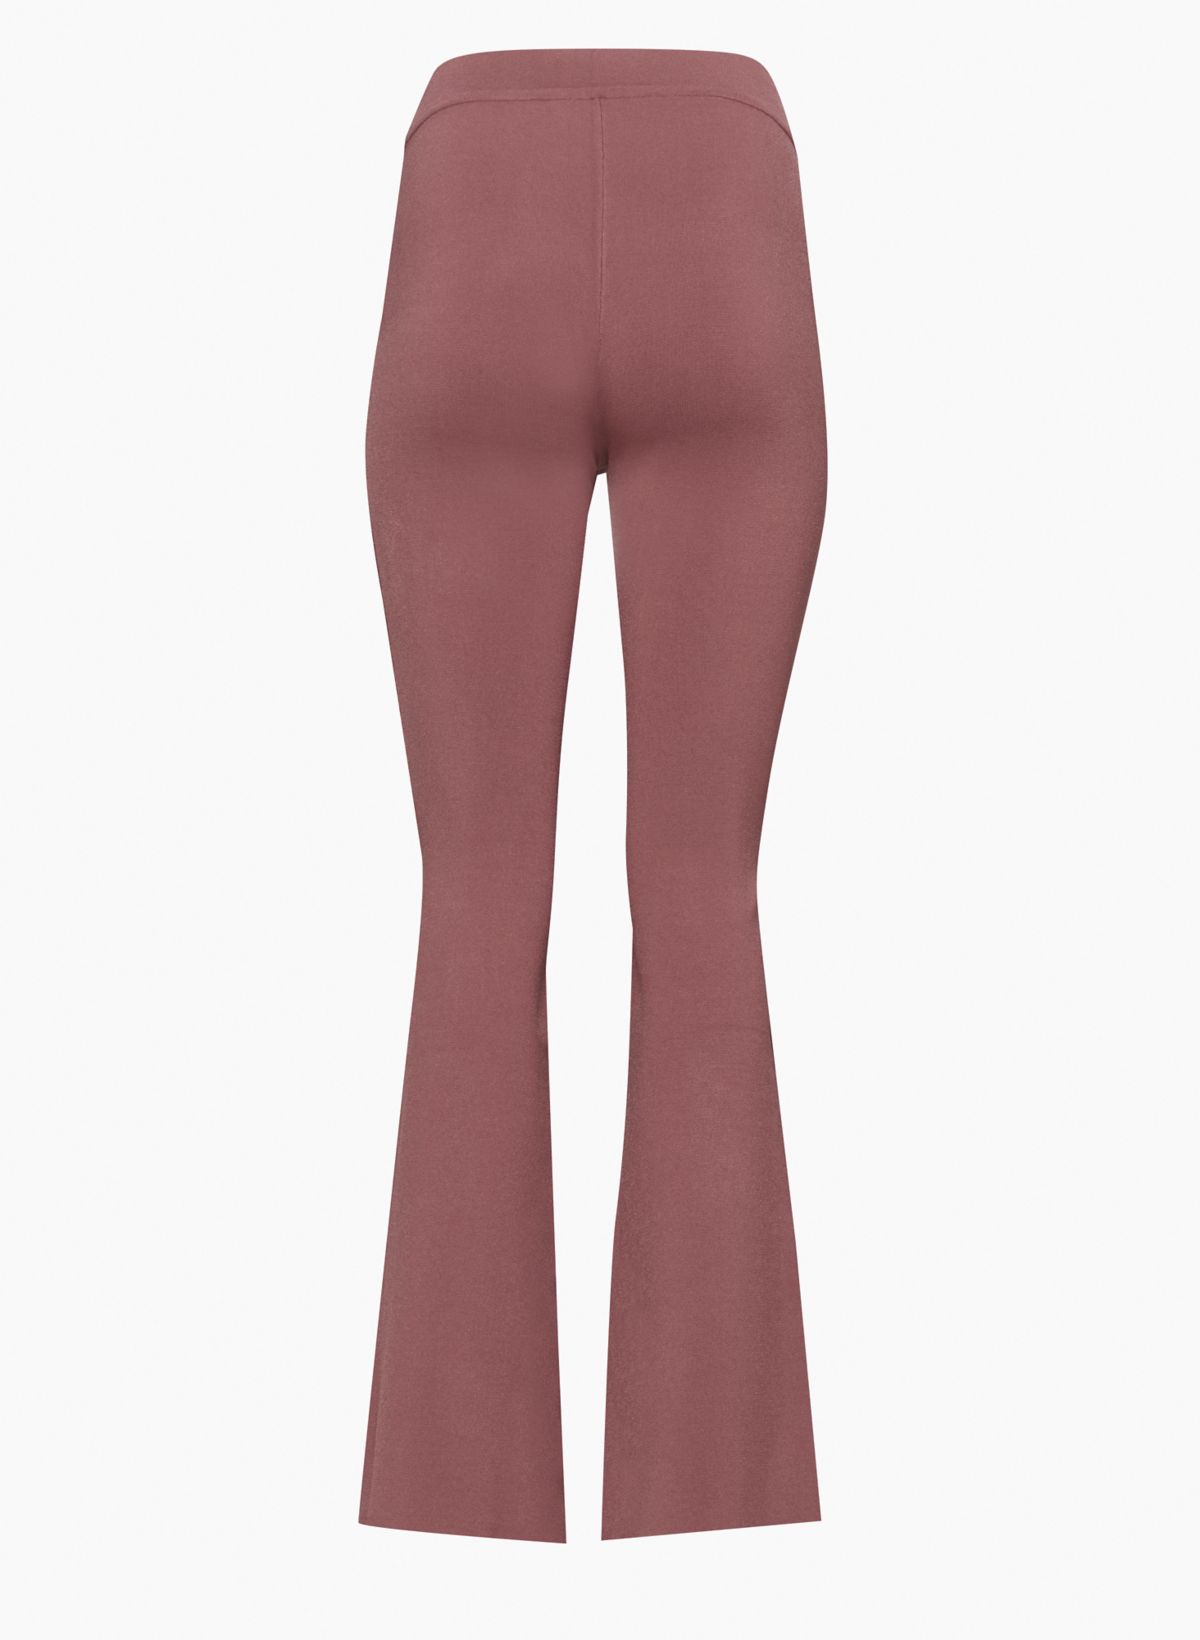 A New Day NWT Women's 6 Dusty Rose High-Rise Side Zip Skinny Ankle Pants